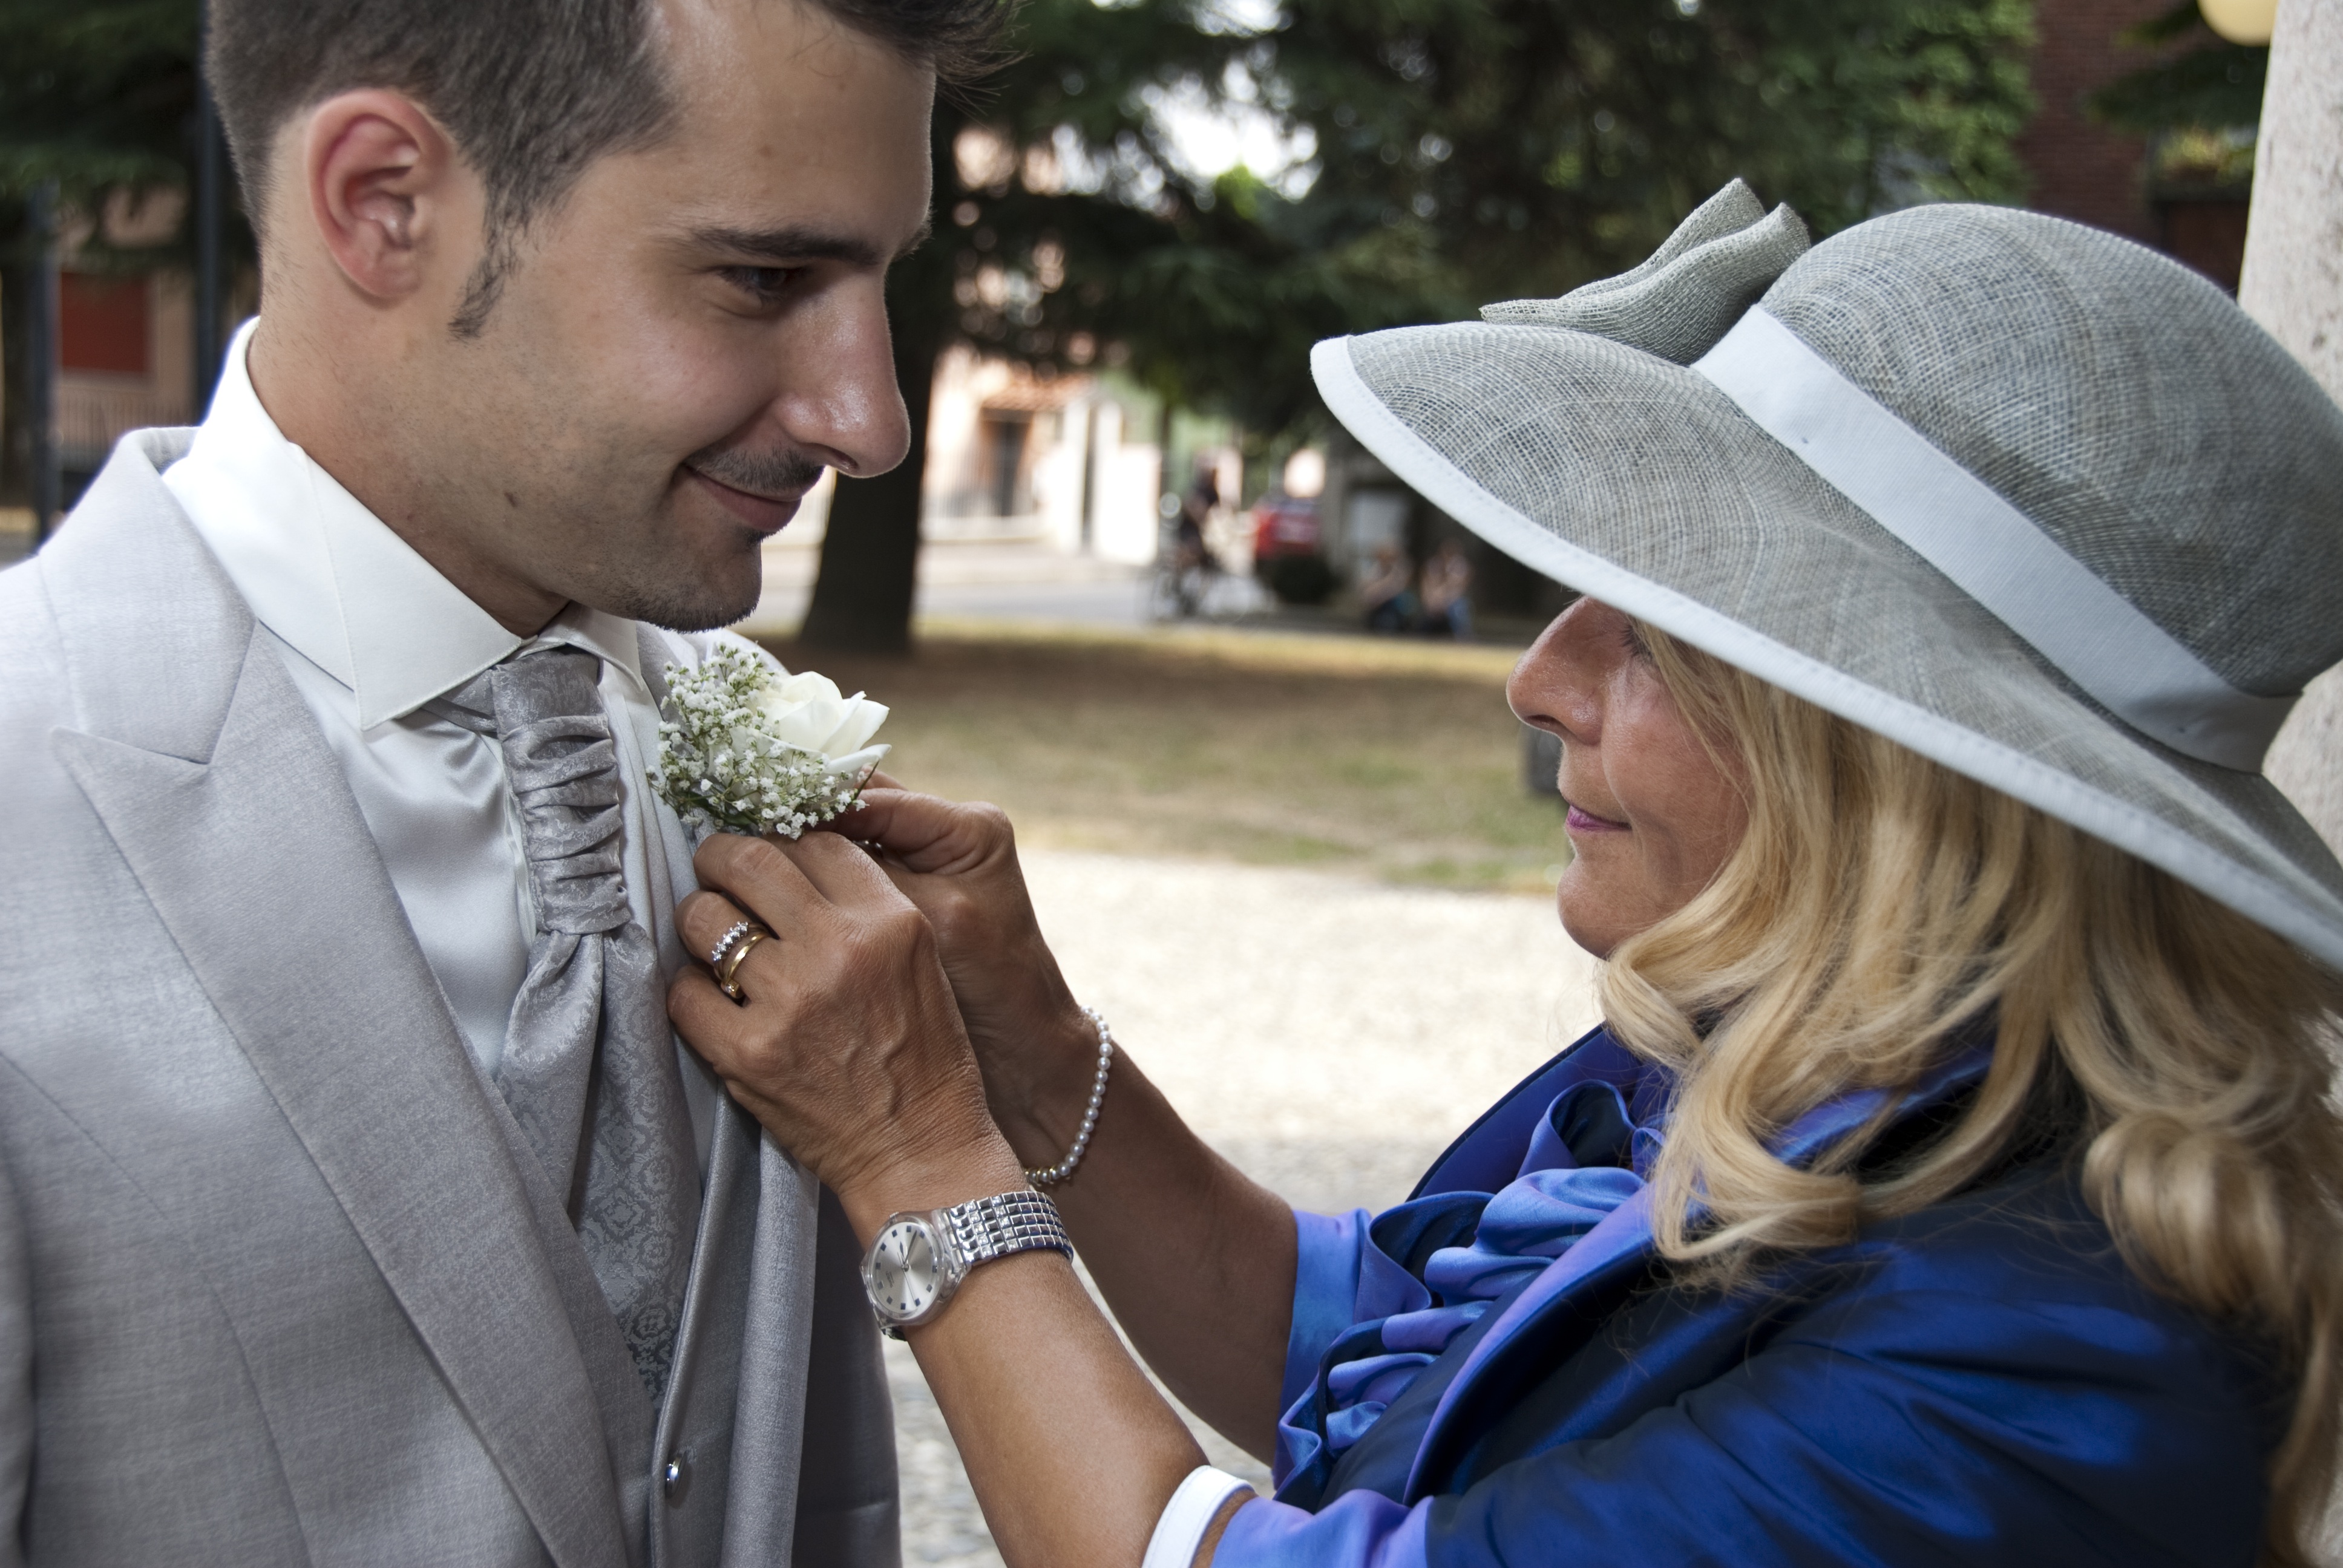 mother fixes her son's boutonnière on his wedding tux